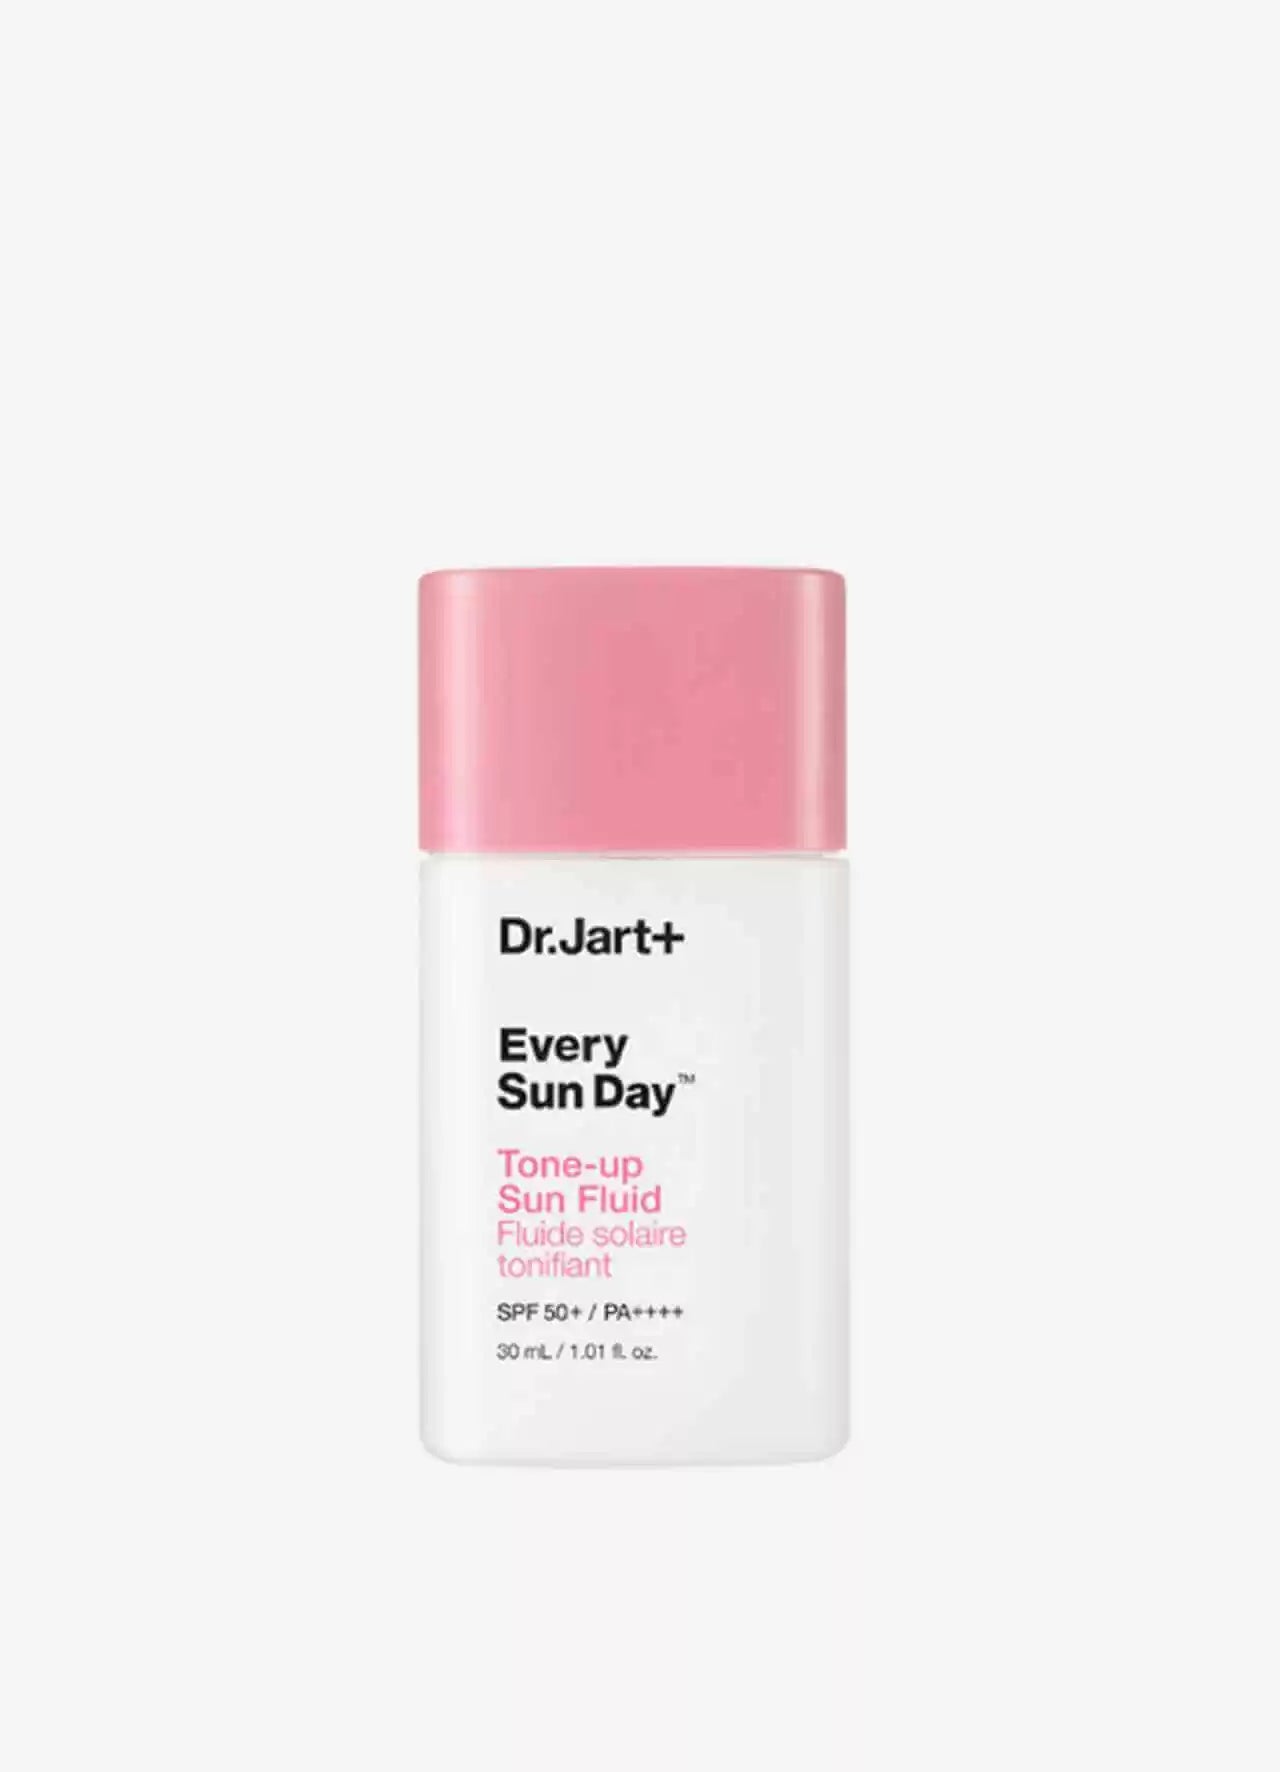 DR.JART+ - Every Sun Day Tone-up Sun Fluid SPF50+ PA++++ (Discounted)